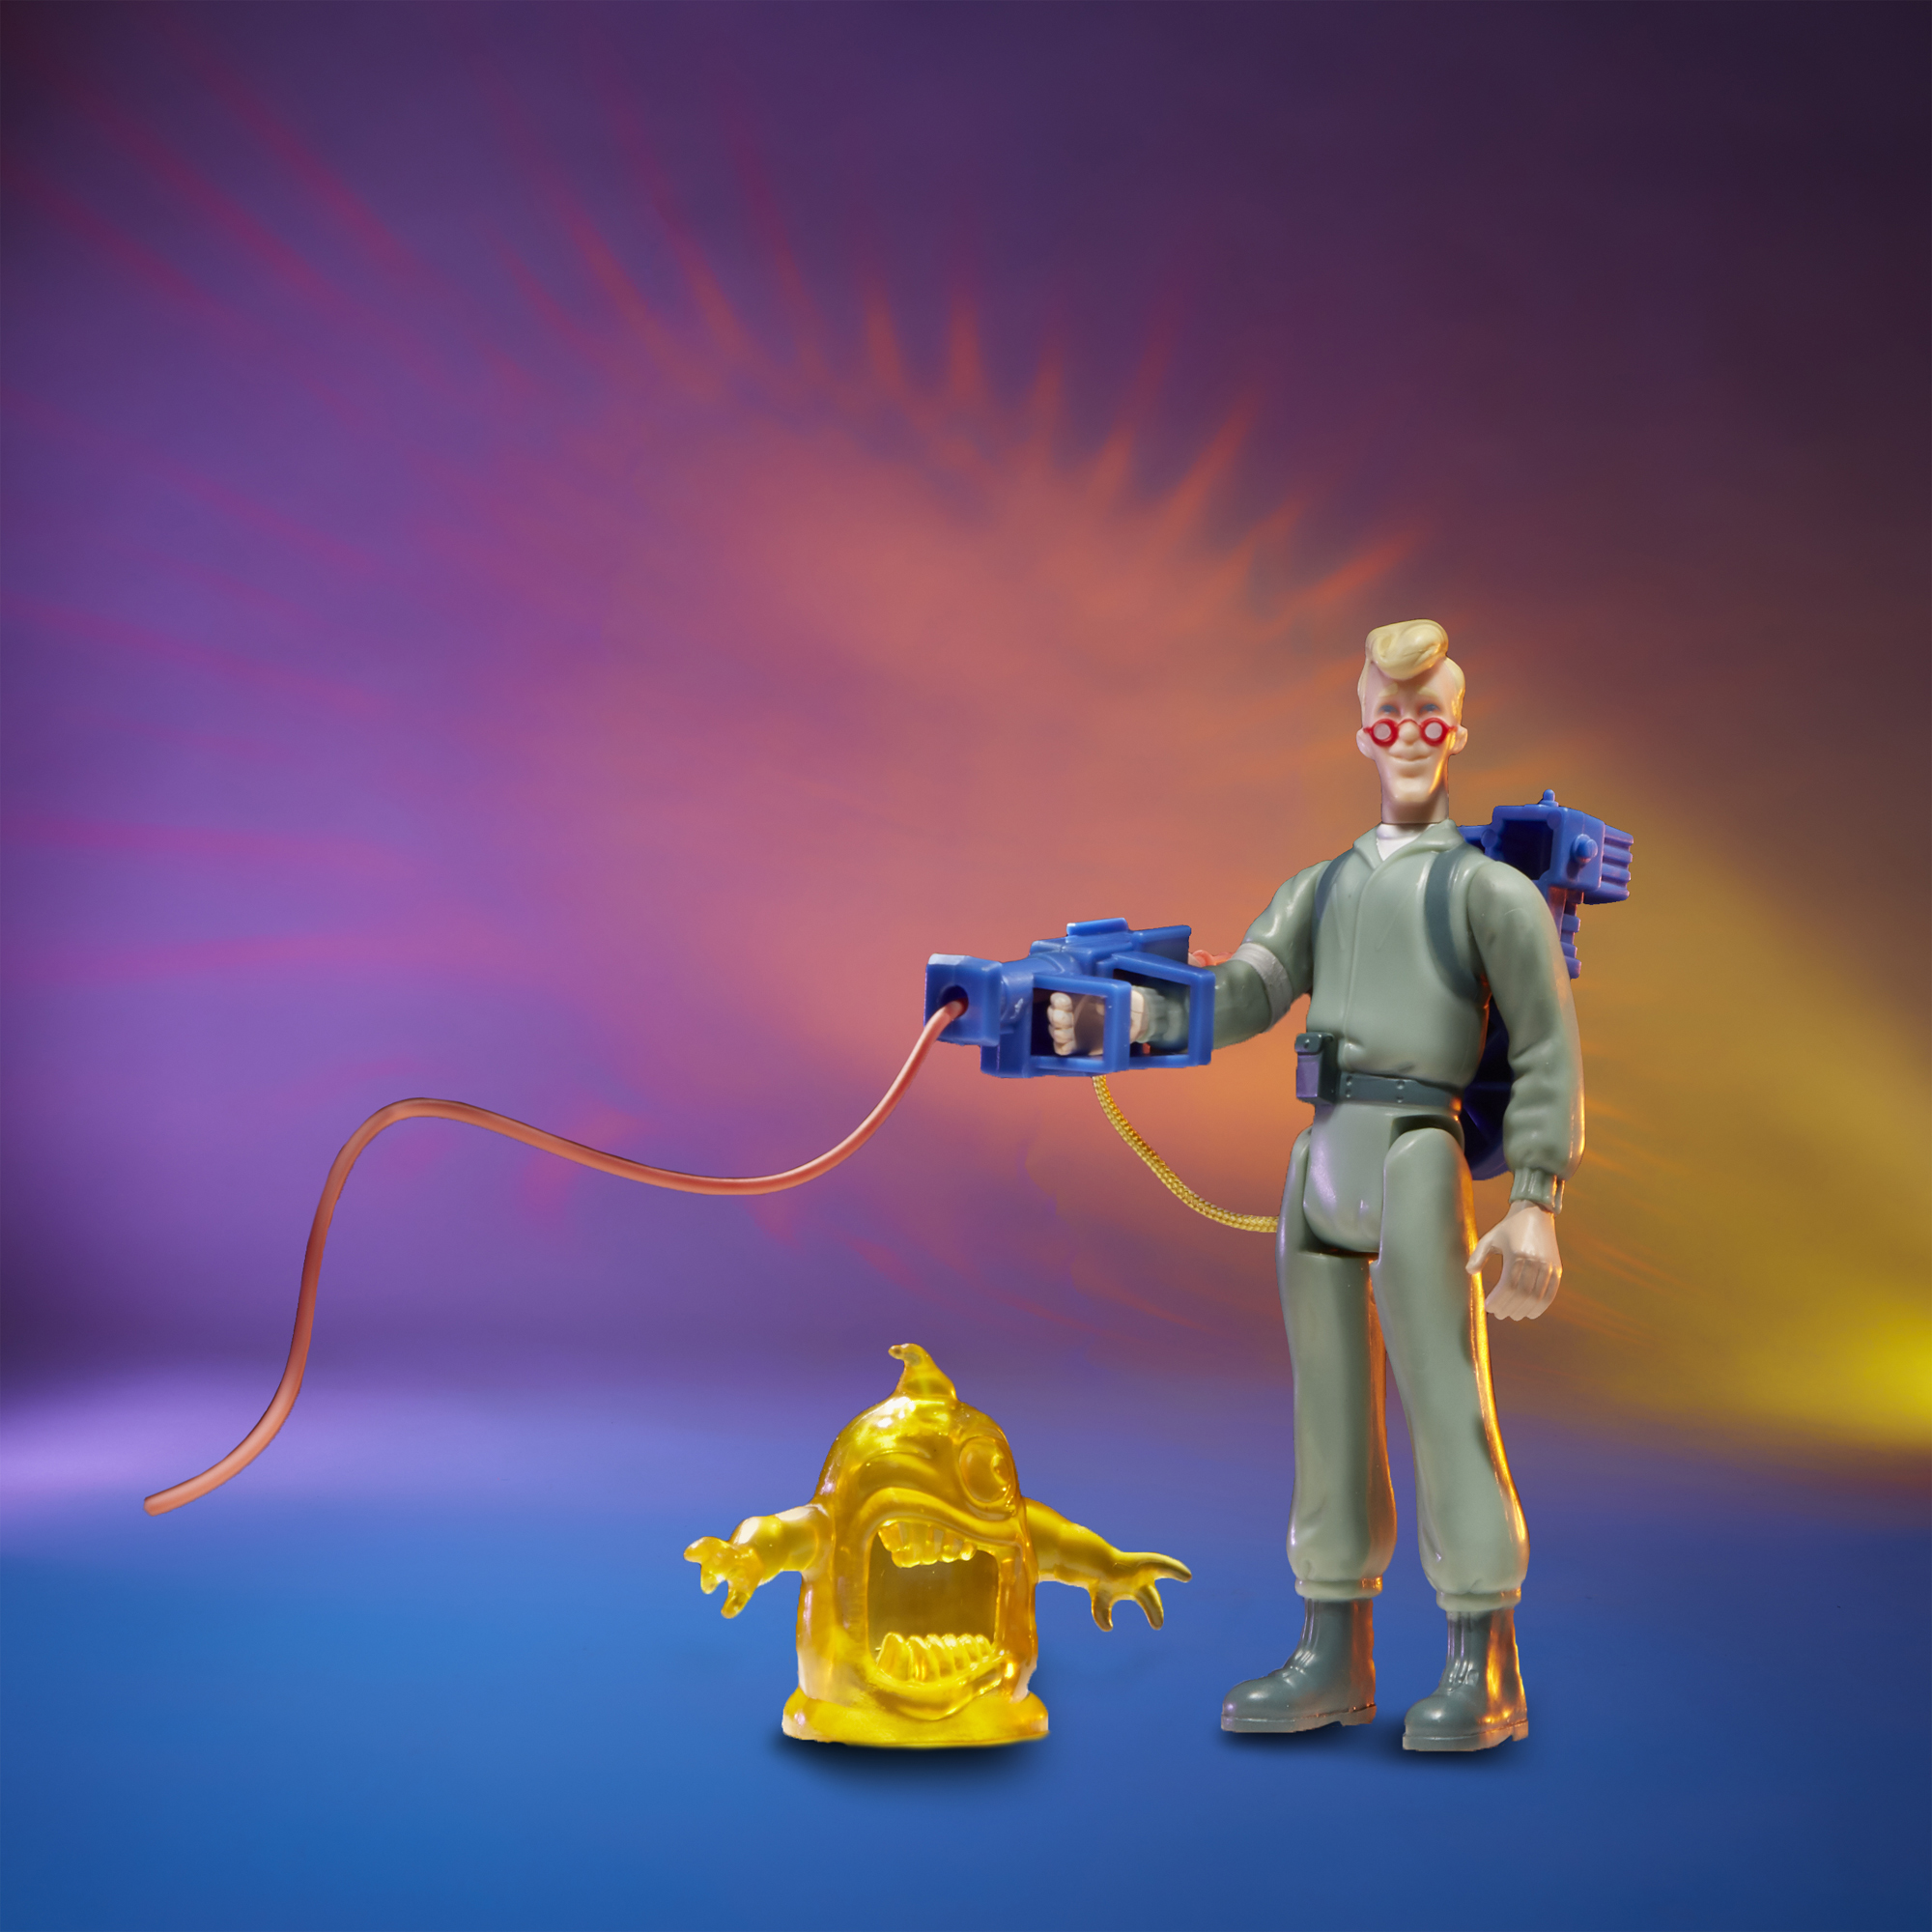 Ghostbusters Kenner Classics Egon Spengler and Gulper Ghost Action Figure - image 4 of 6